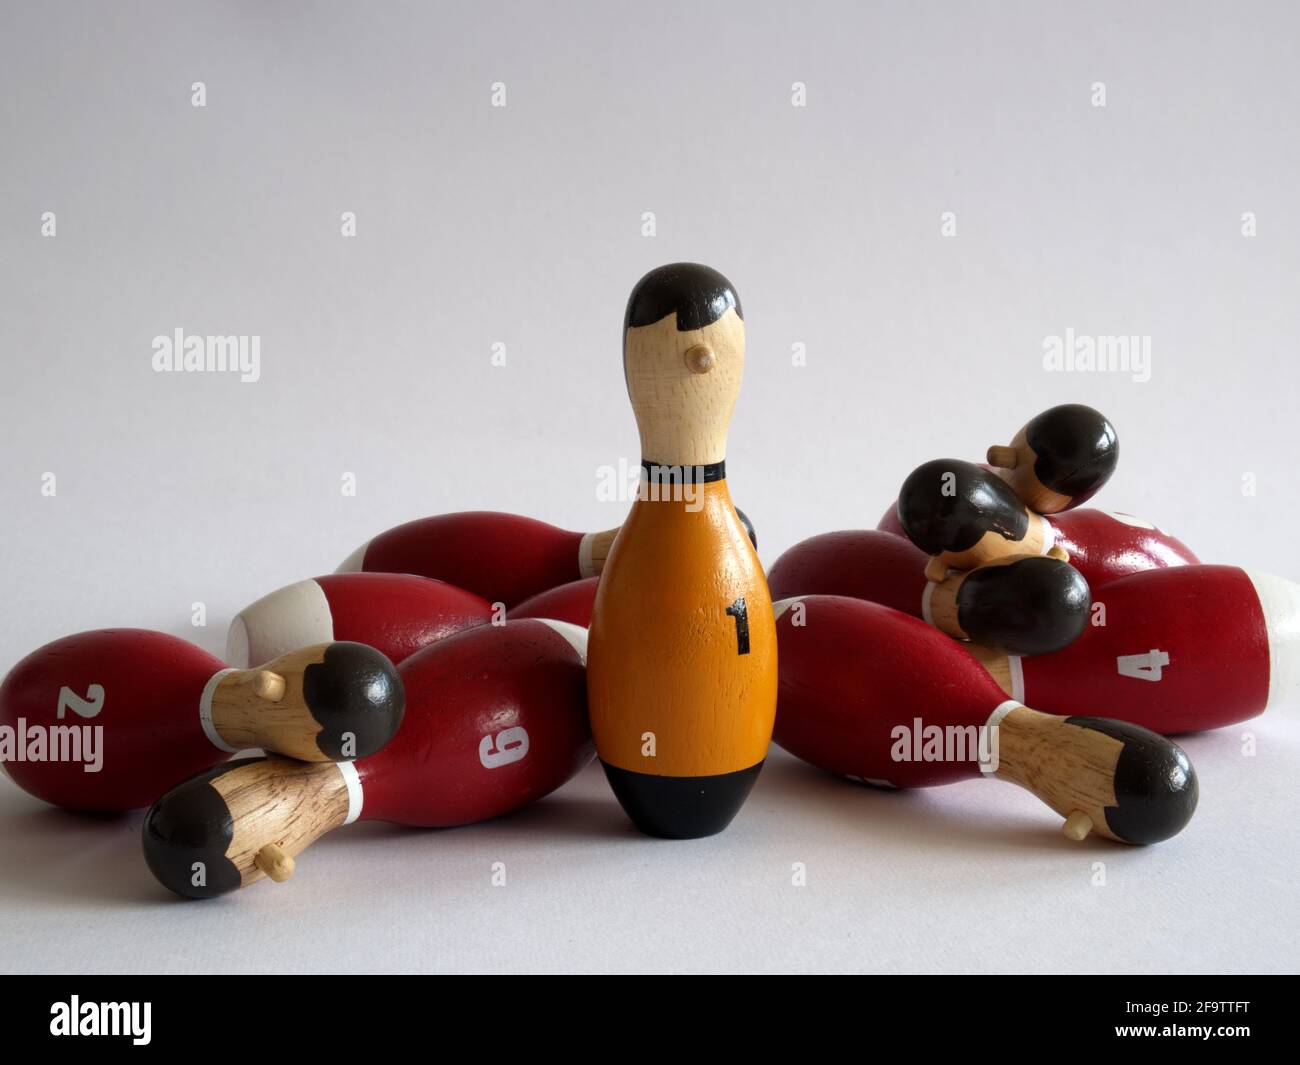 conceptual photo: all players are grounded defeated, only number one remains standing in front of the camera Stock Photo